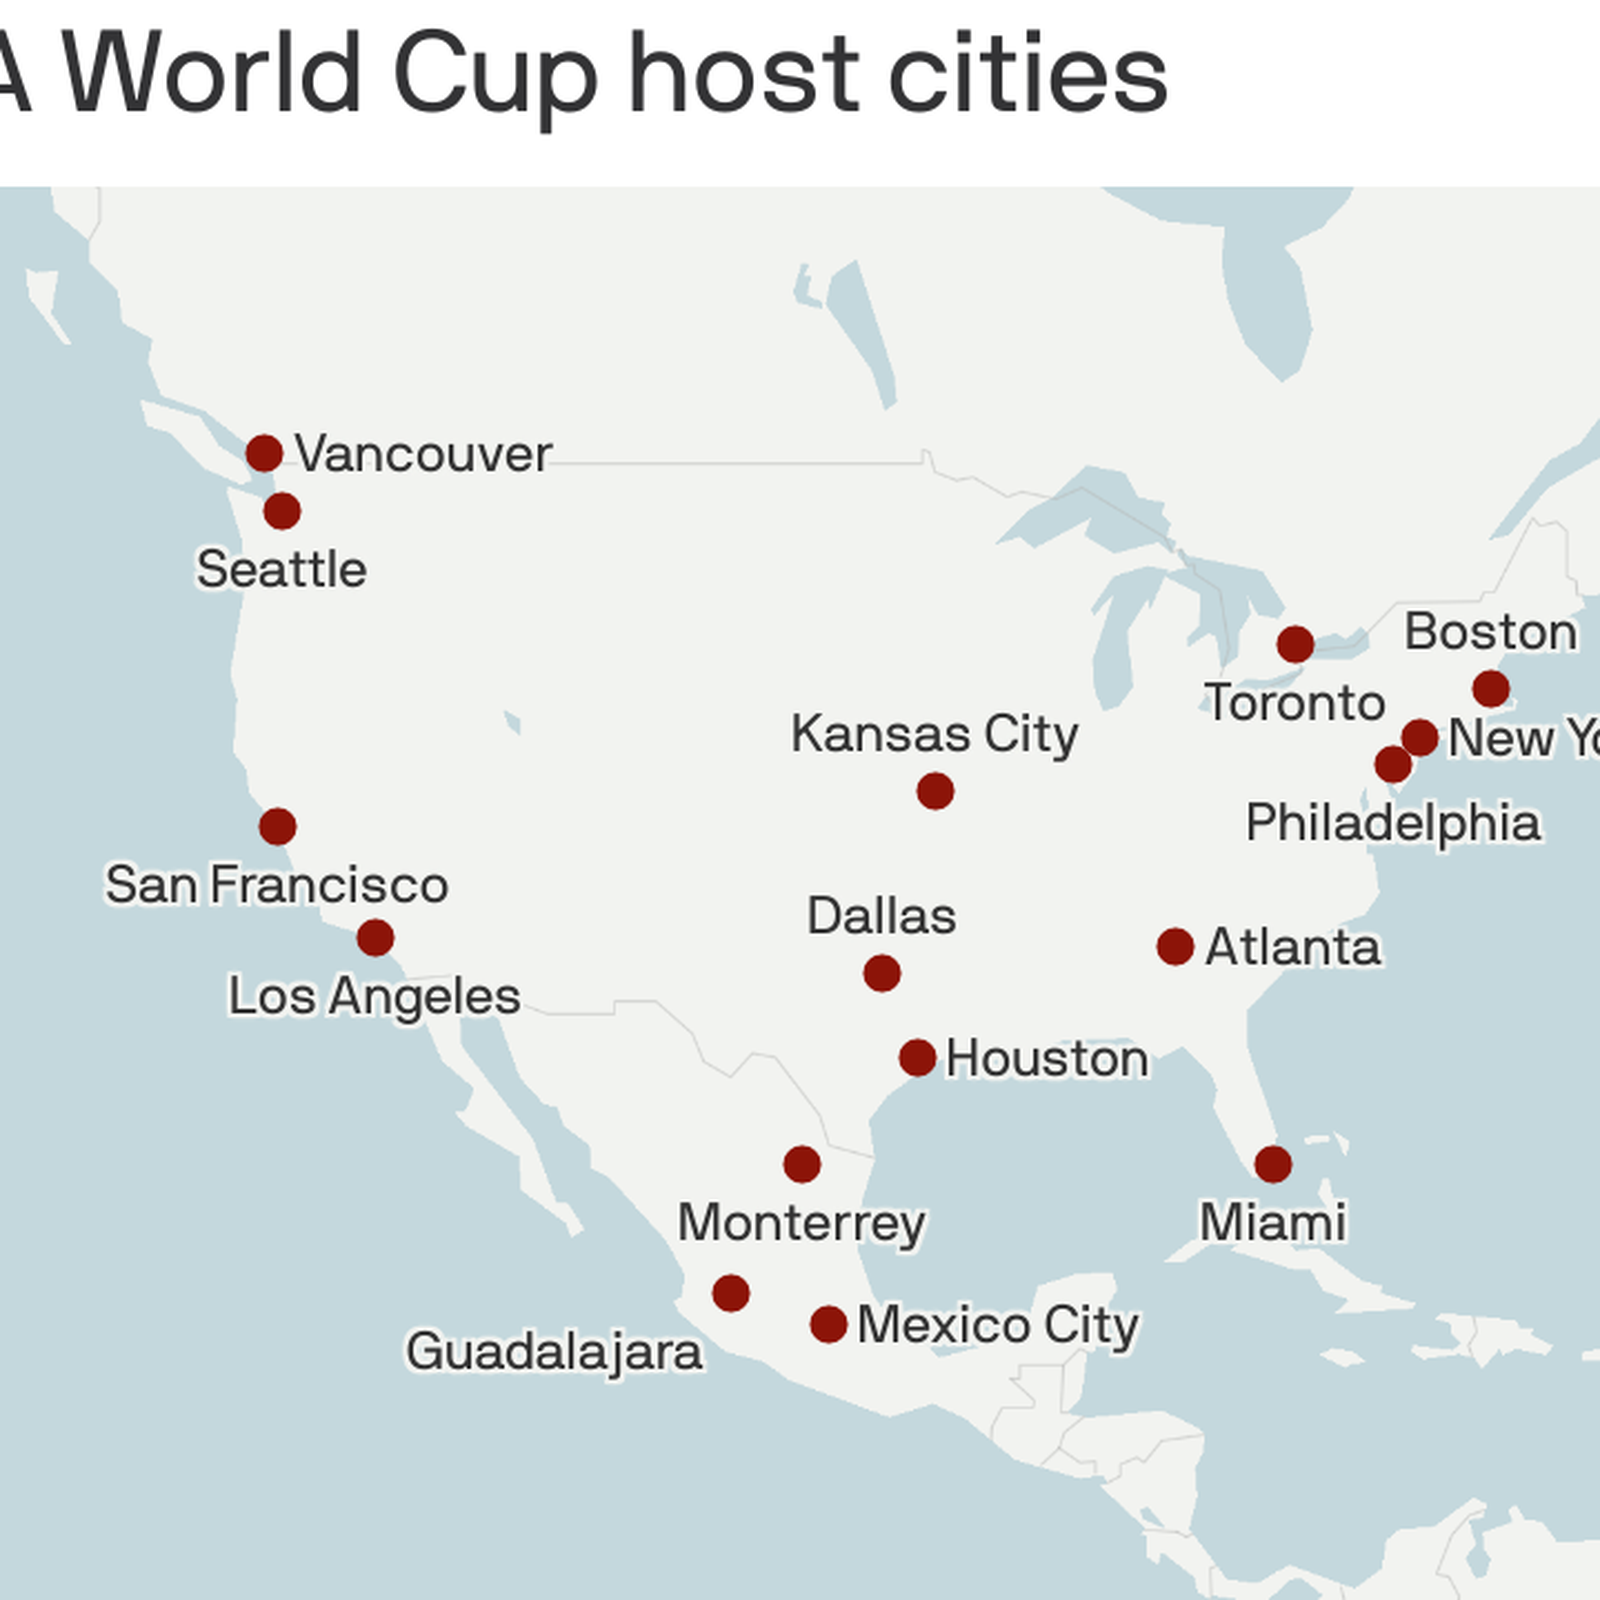 Bring the World Cup to Dallas in 2026